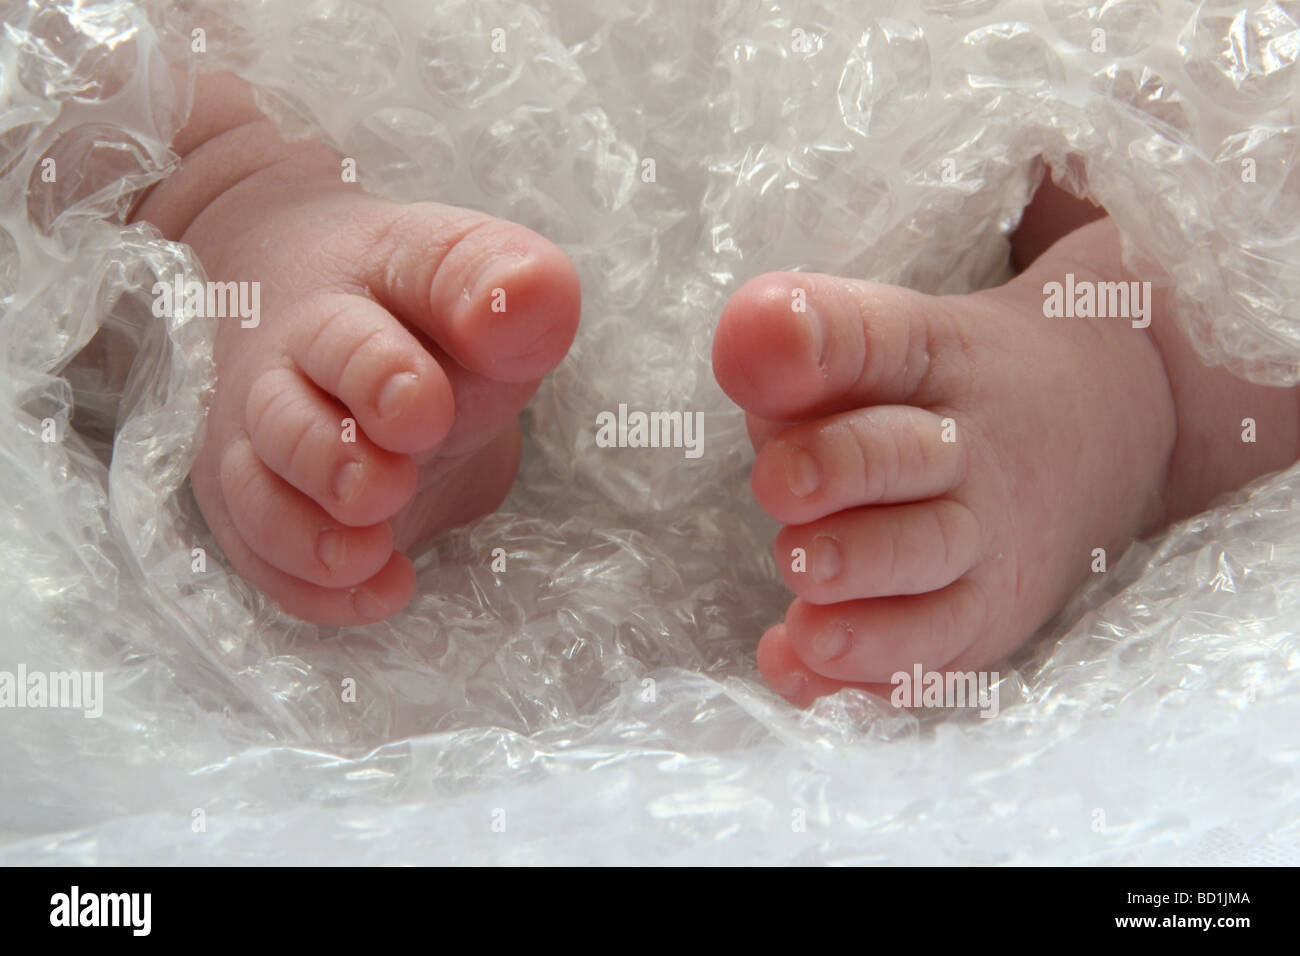 Baby Feet wrapped up in Bubble Wrap Stock Photo: 25237530 - Alamy